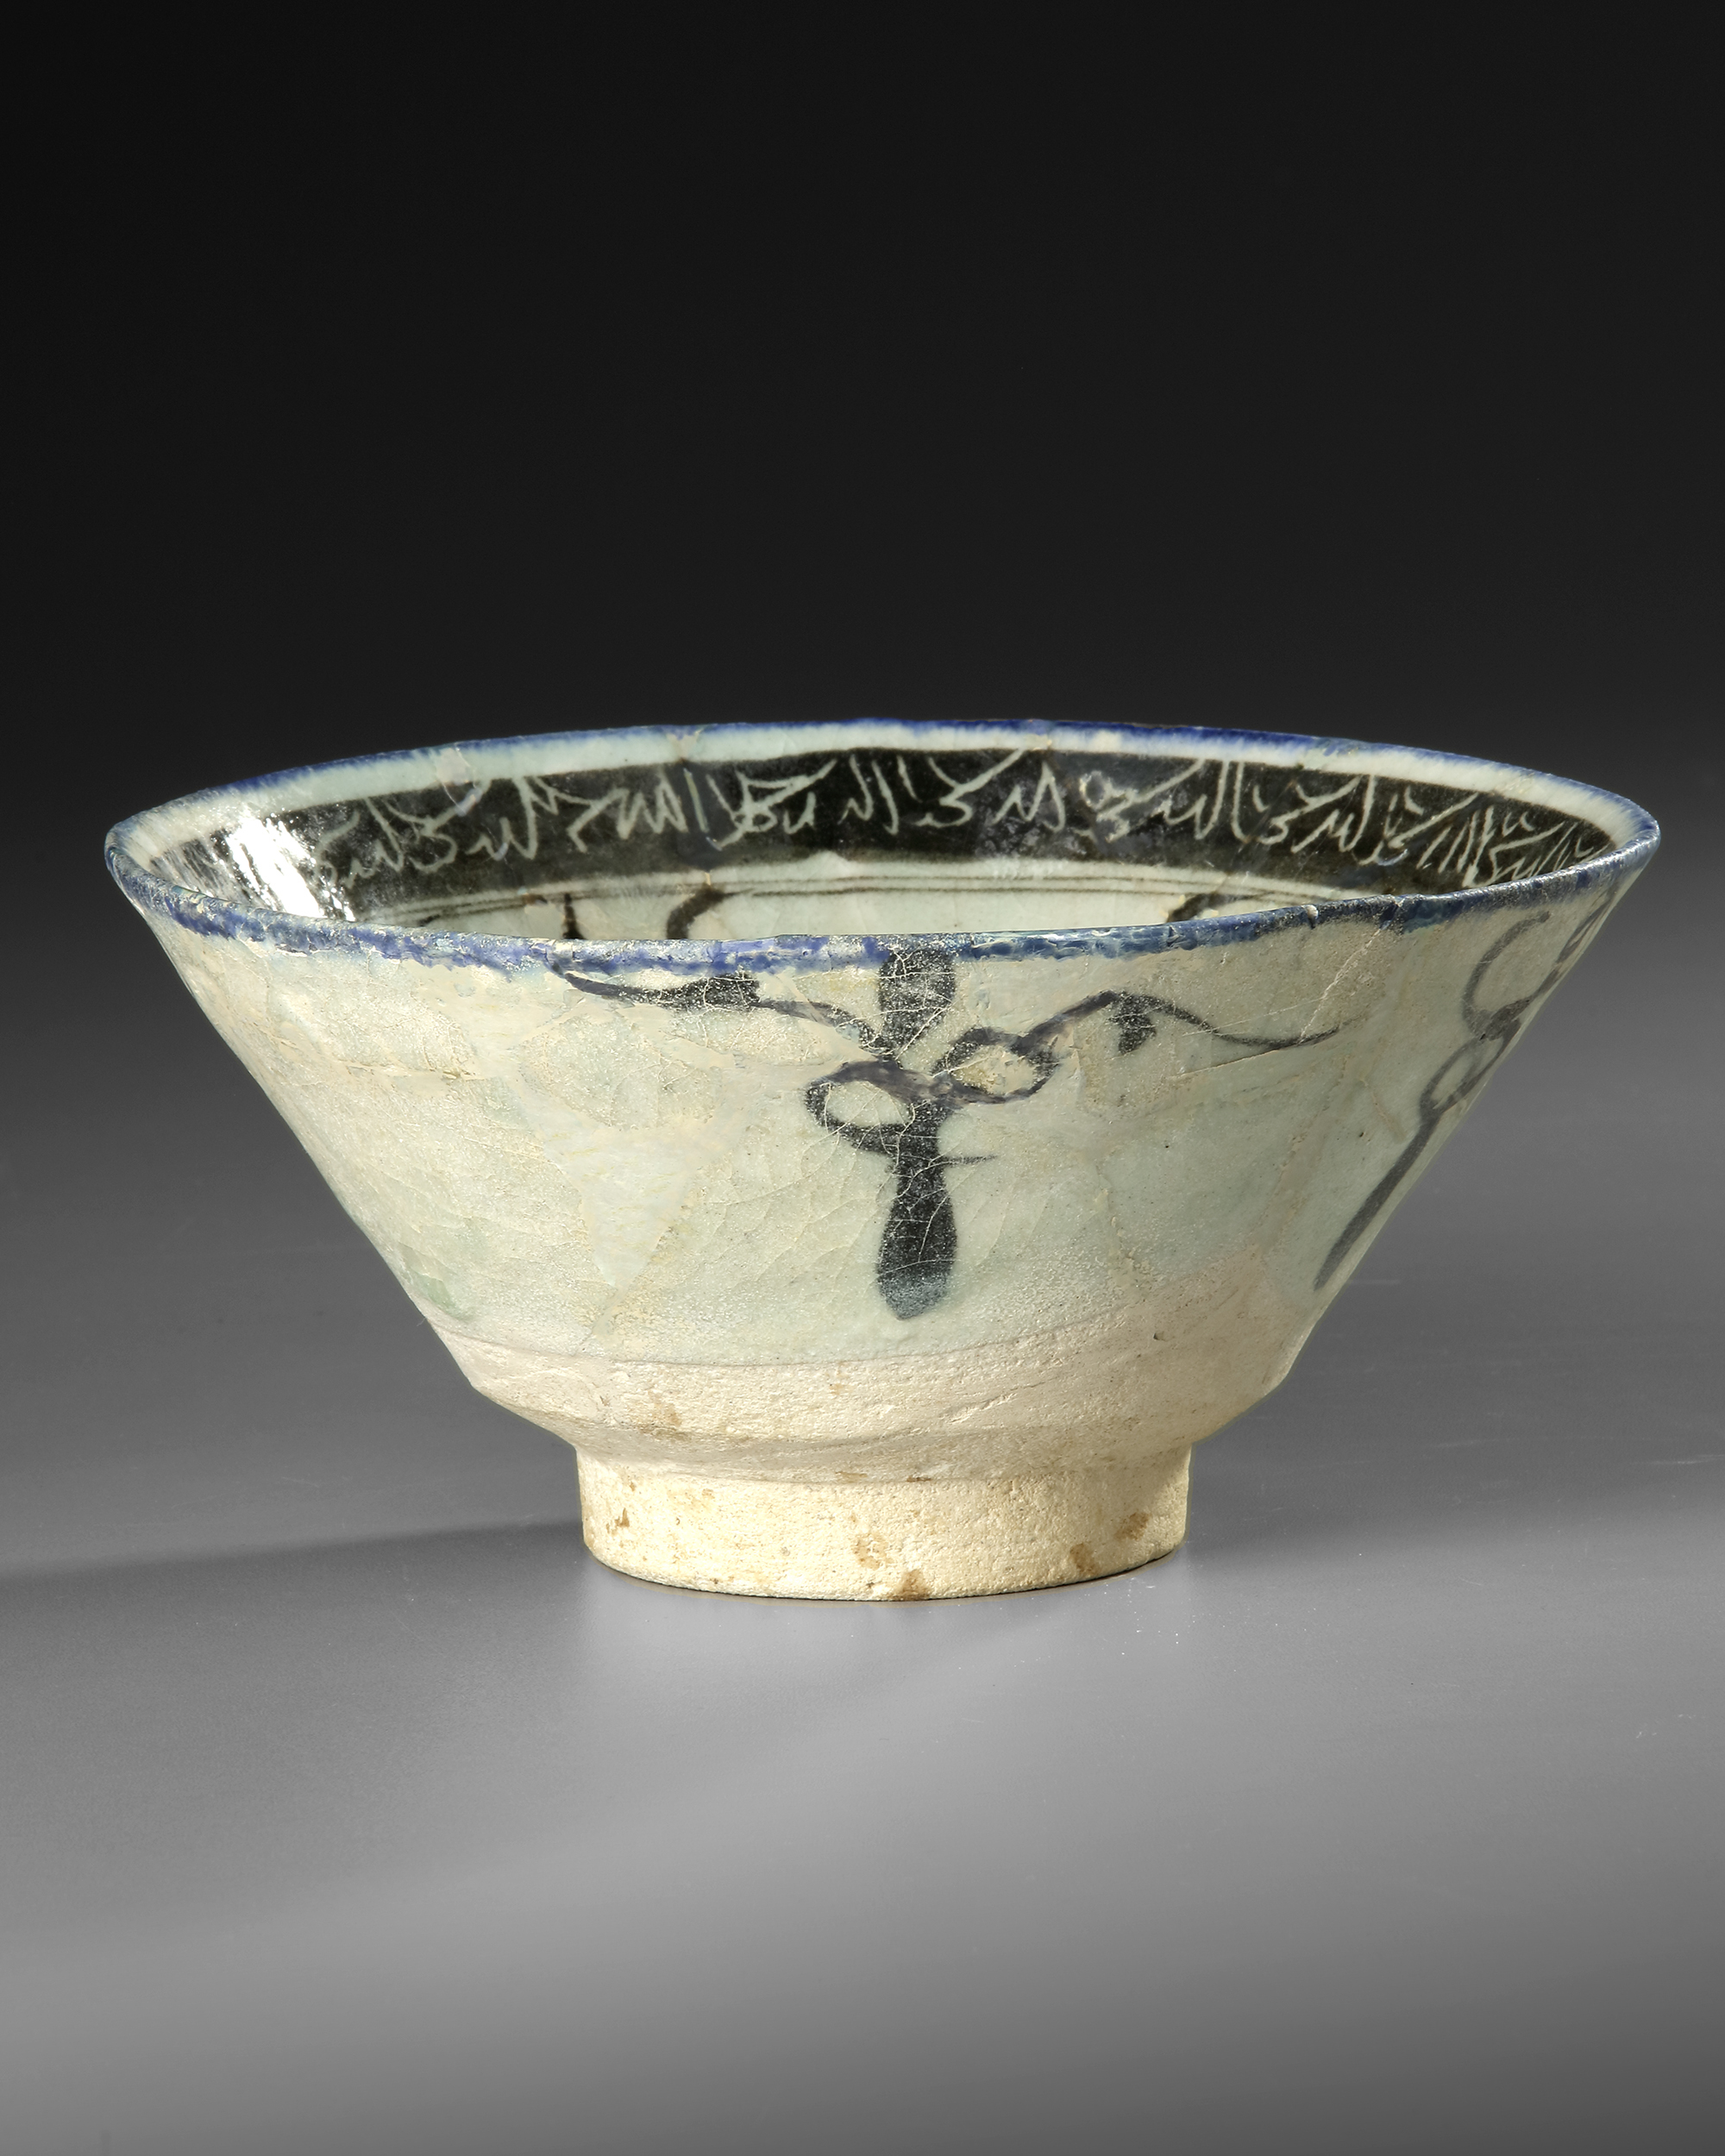 A KASHAN POTTERY BOWL, PERSIA, 13TH CENTURY - Image 4 of 8